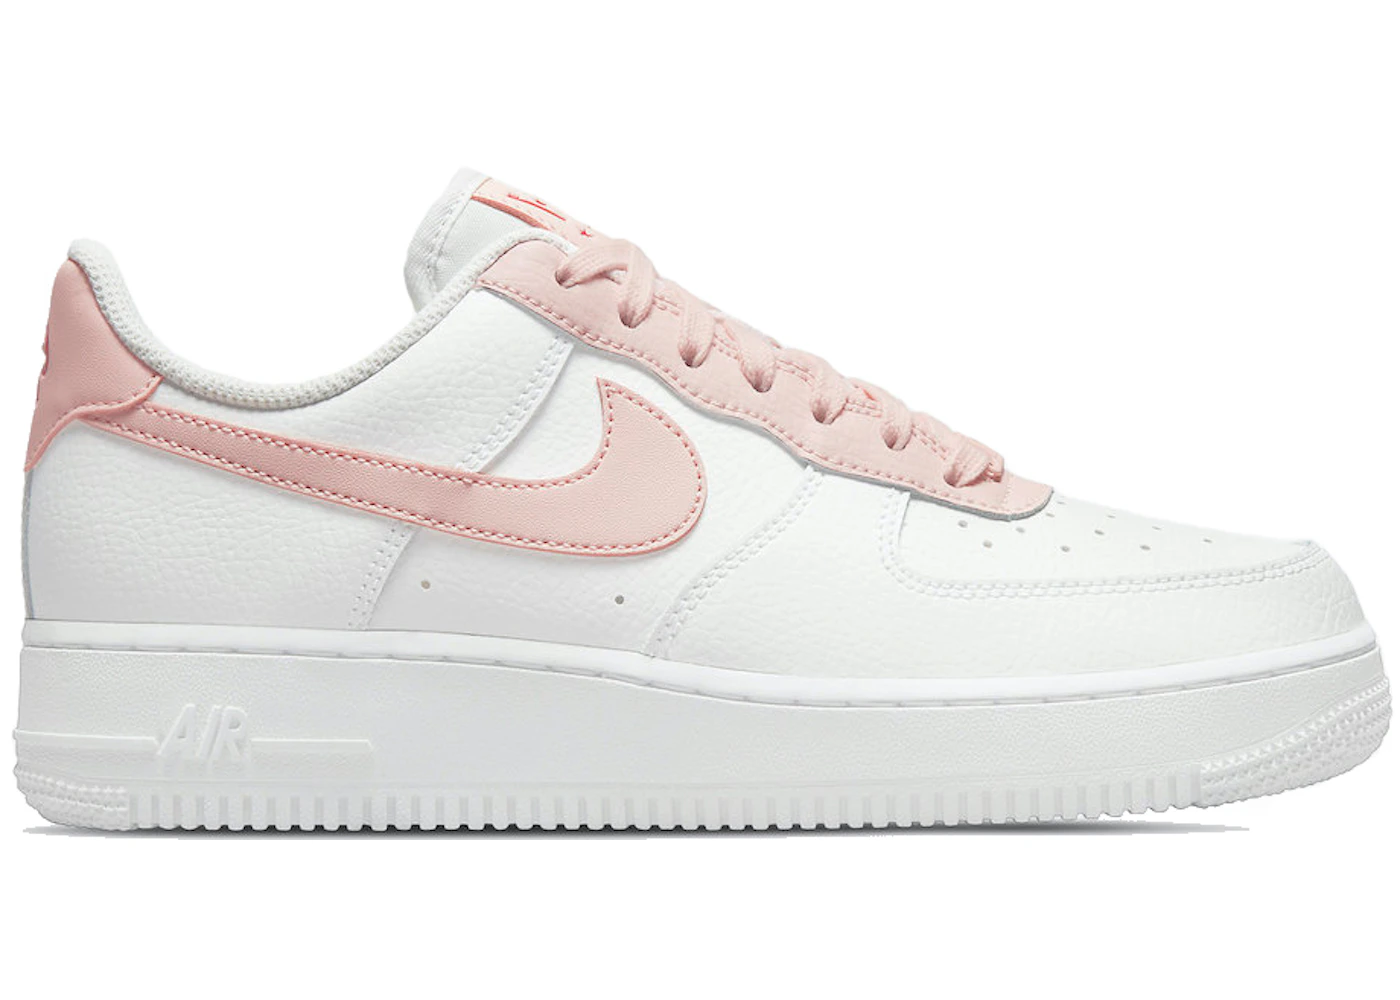 Nike Air Force 1 Low Pale Coral (Women's) - 315115-167 - US